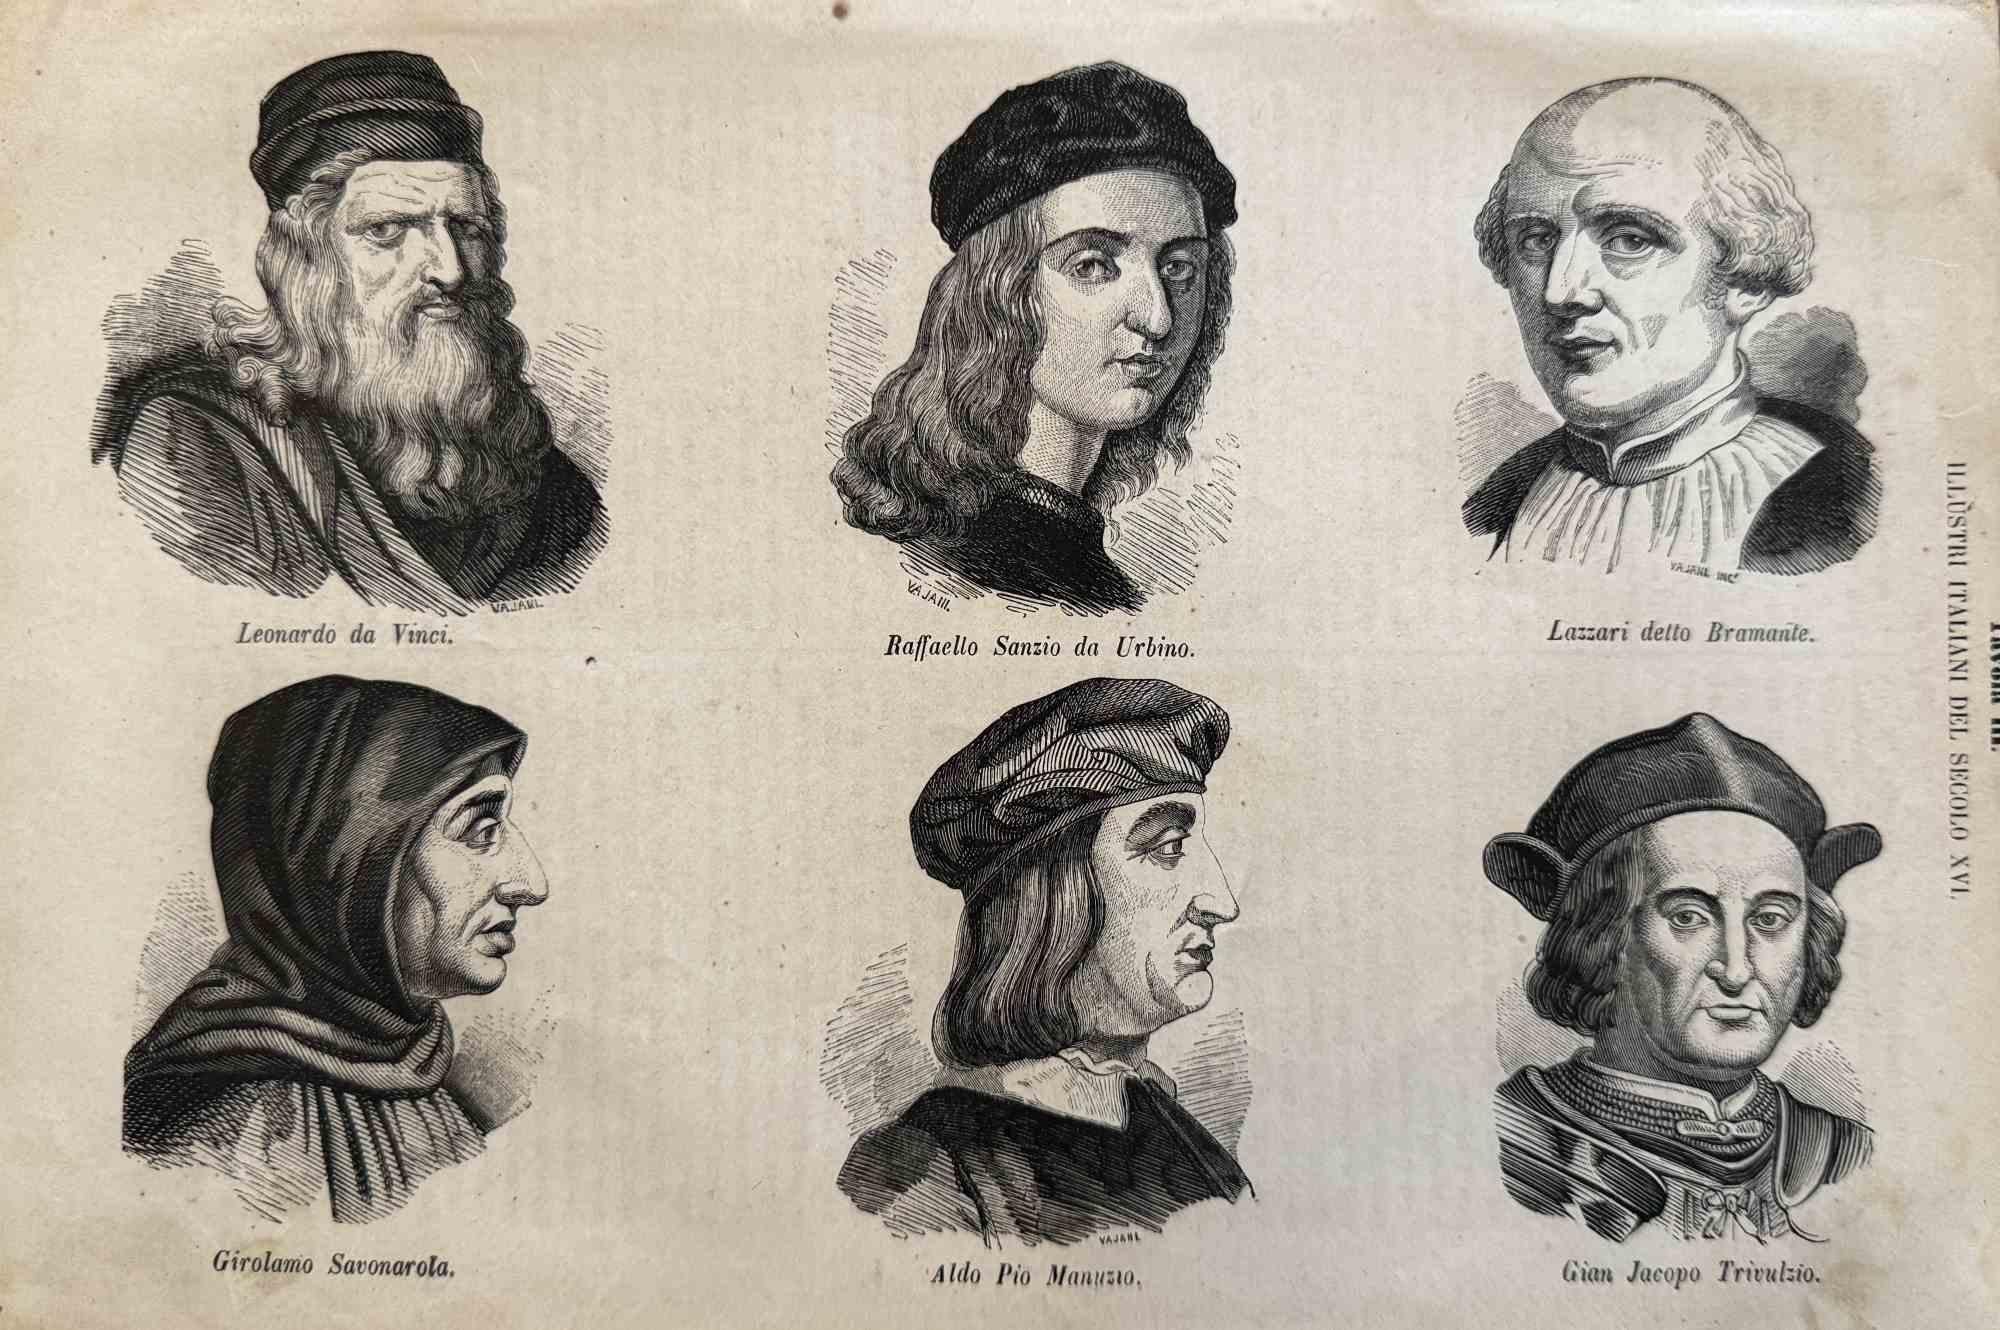 Various Artists Figurative Print - Italian Celebrities of 16th Century - Lithograph - 1862